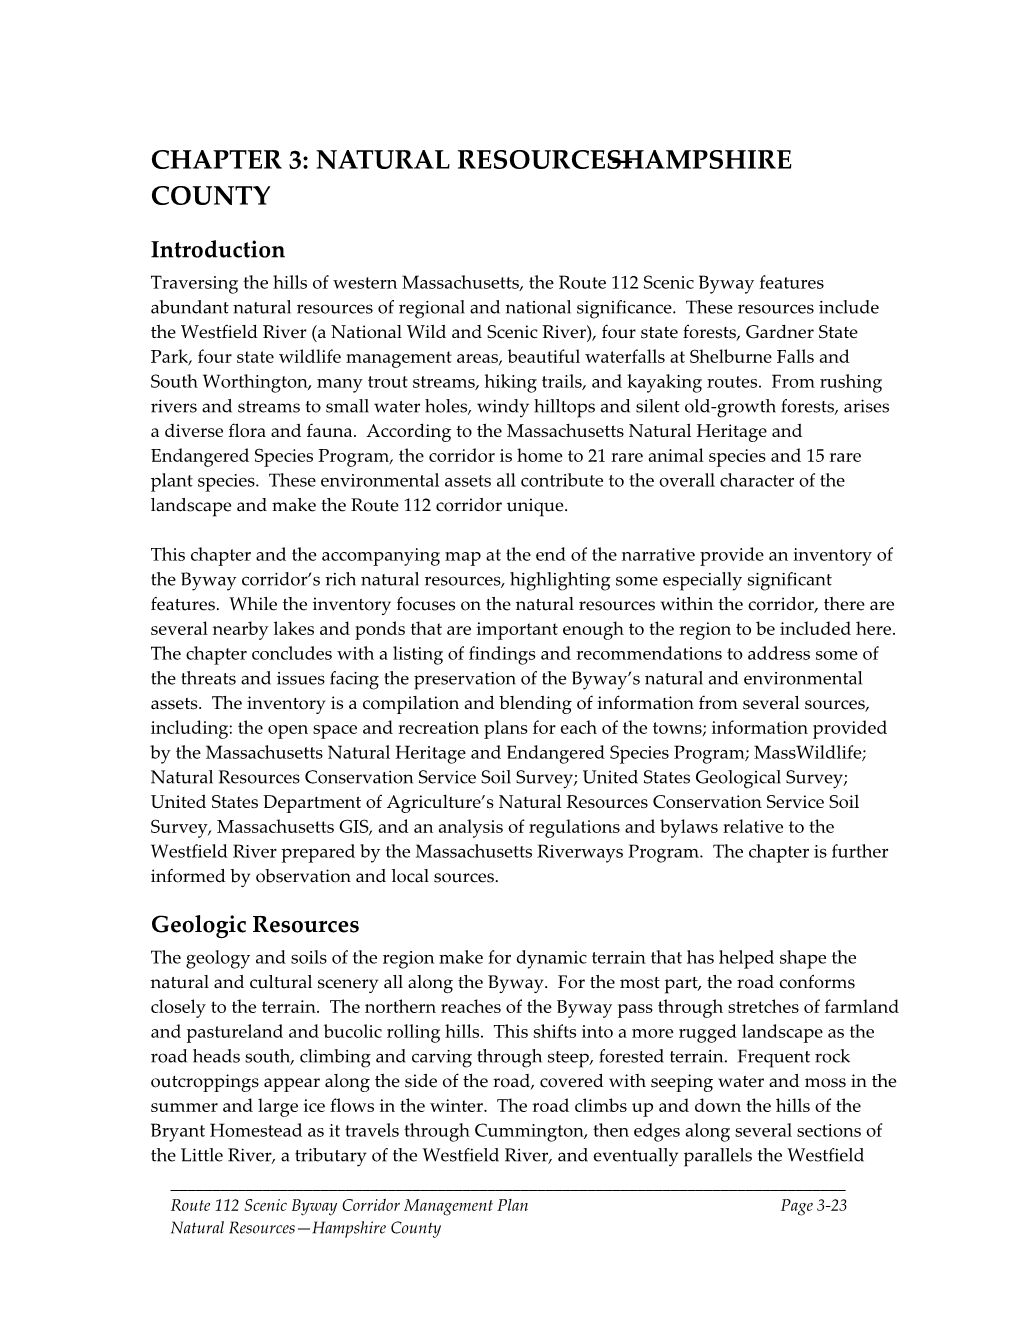 Natural Resources—Hampshire County